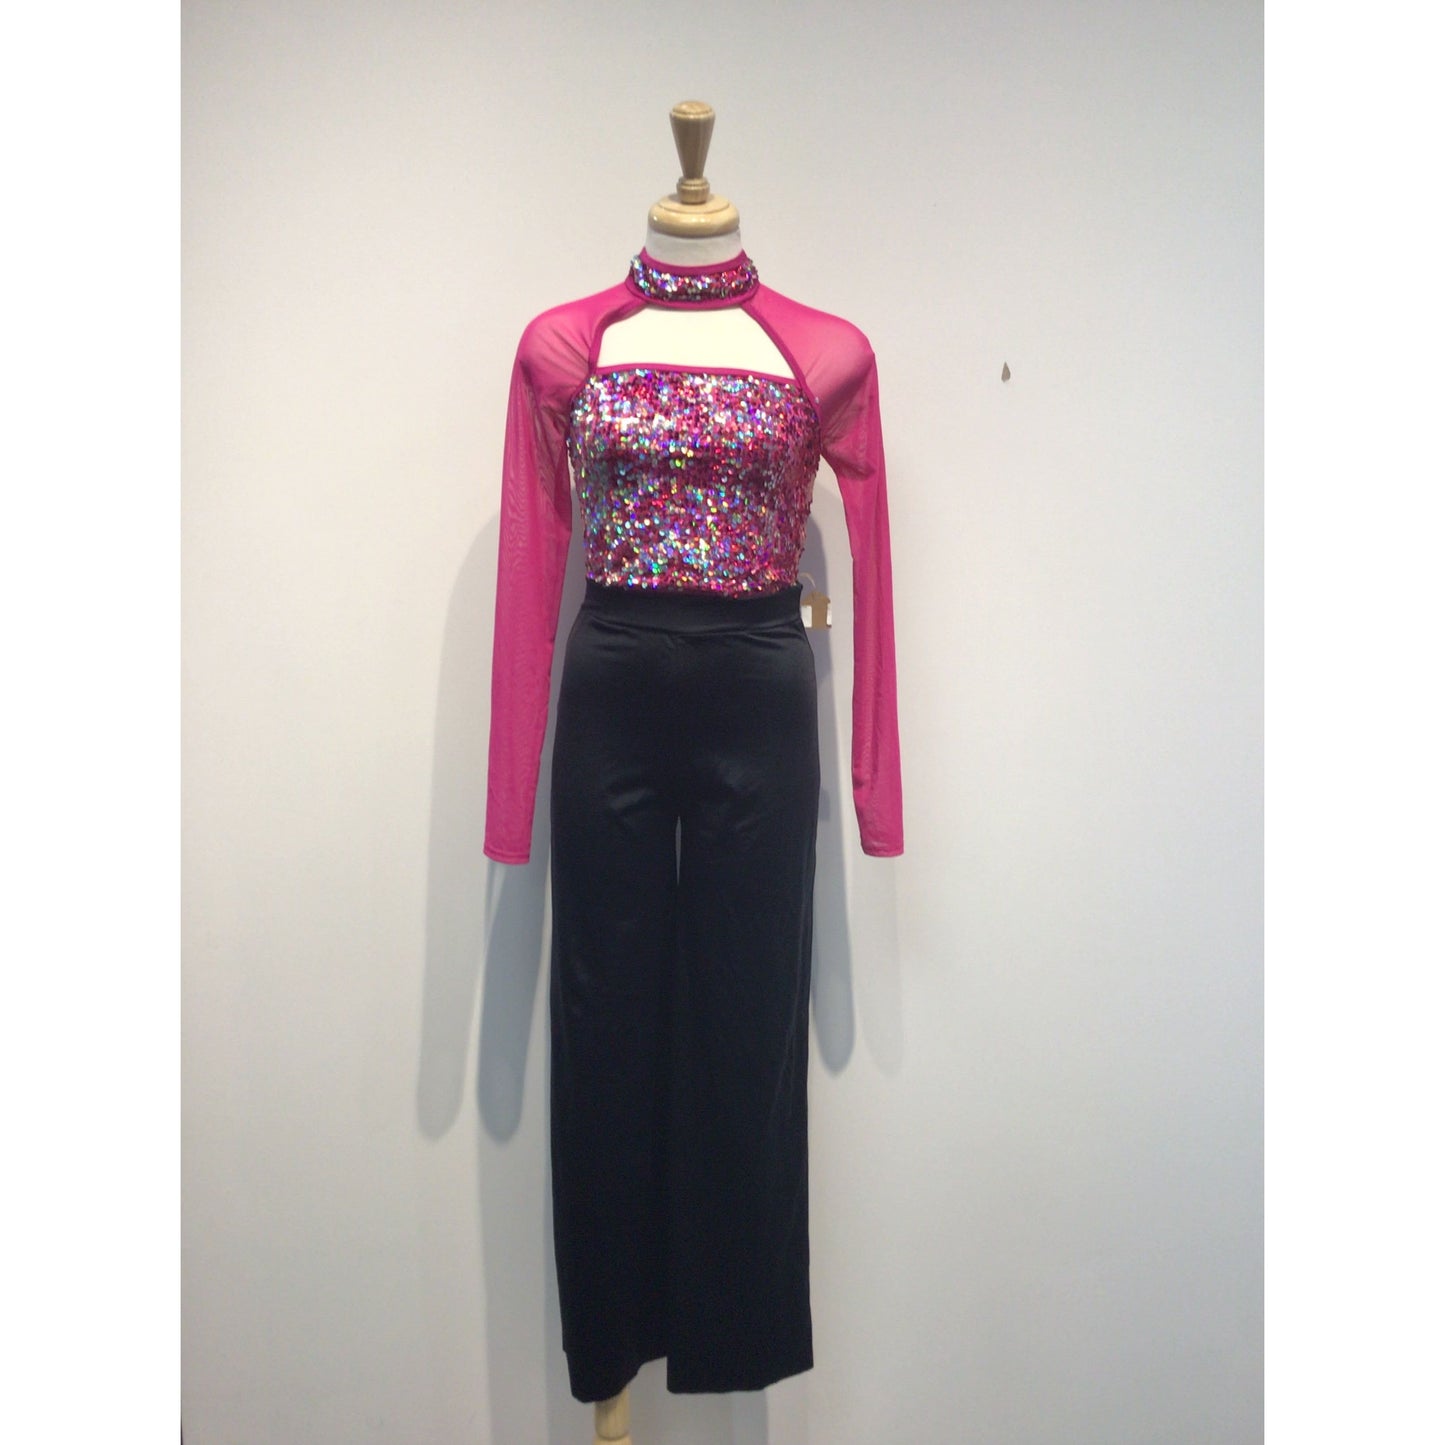 Two Piece Pink Sparkle Top and Black Pants